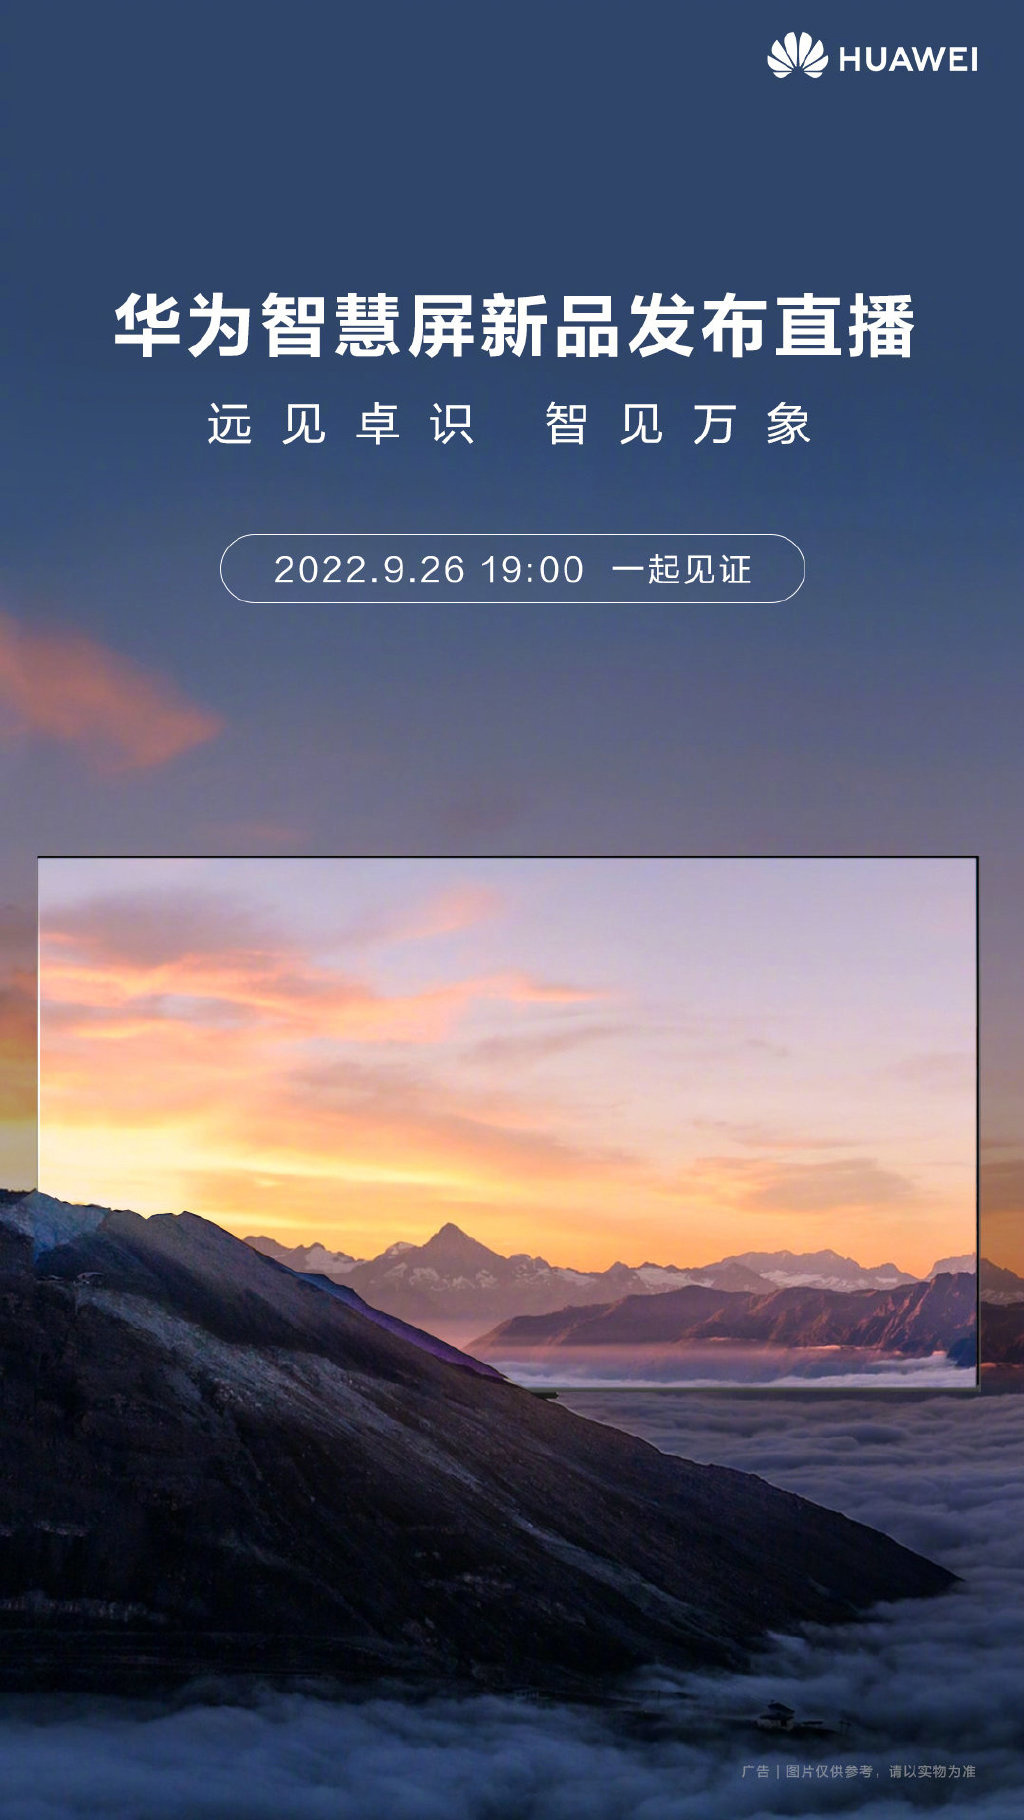 Huawei's new smart screen product launching on September 26 image